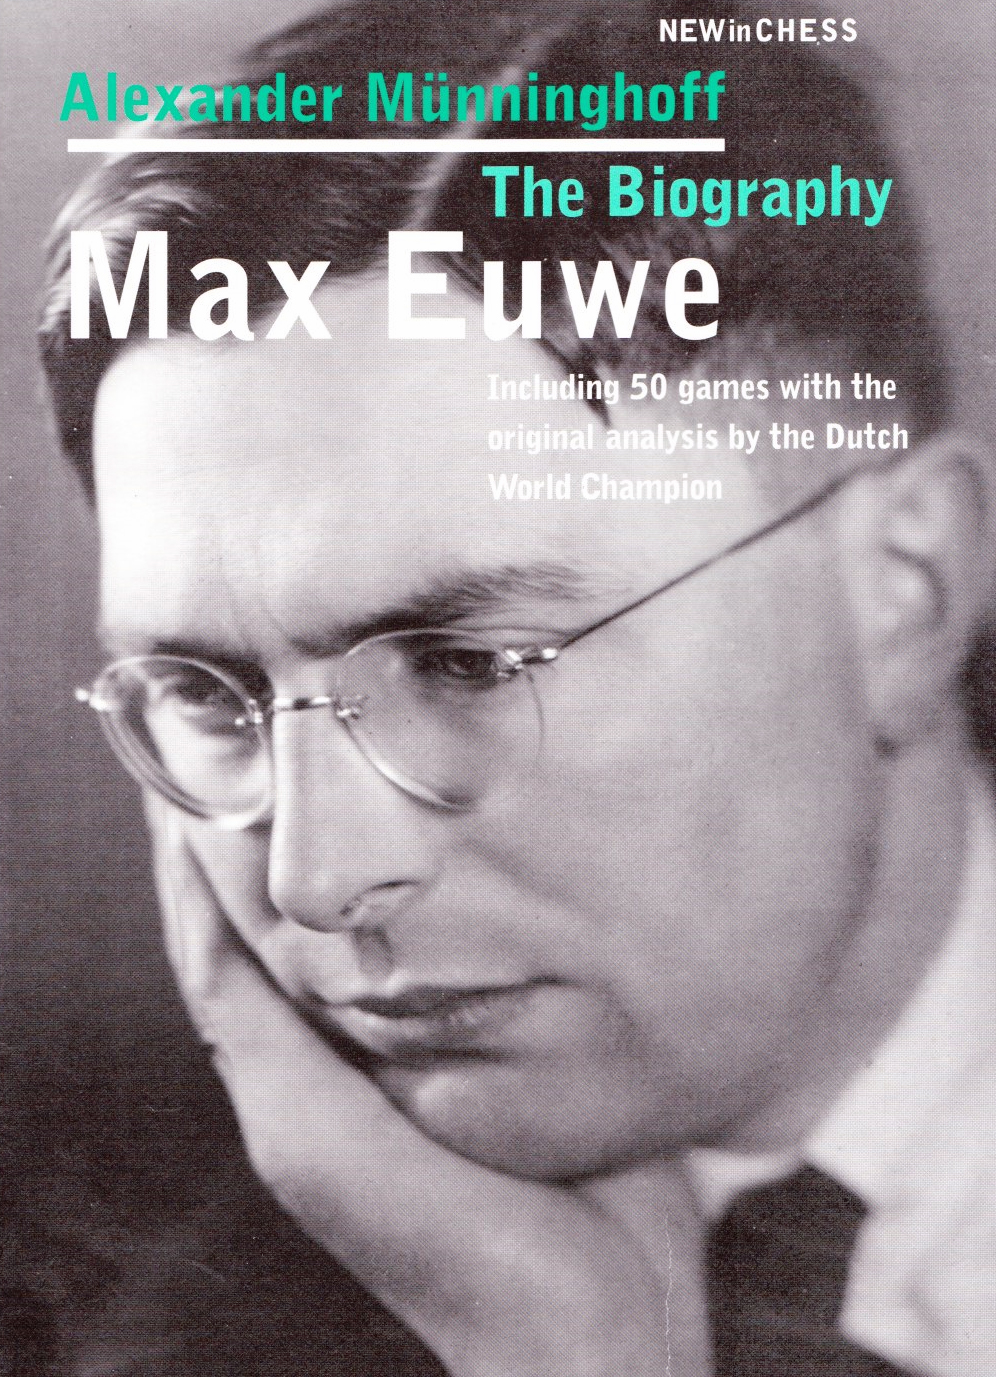 Max Euwe - The Biography